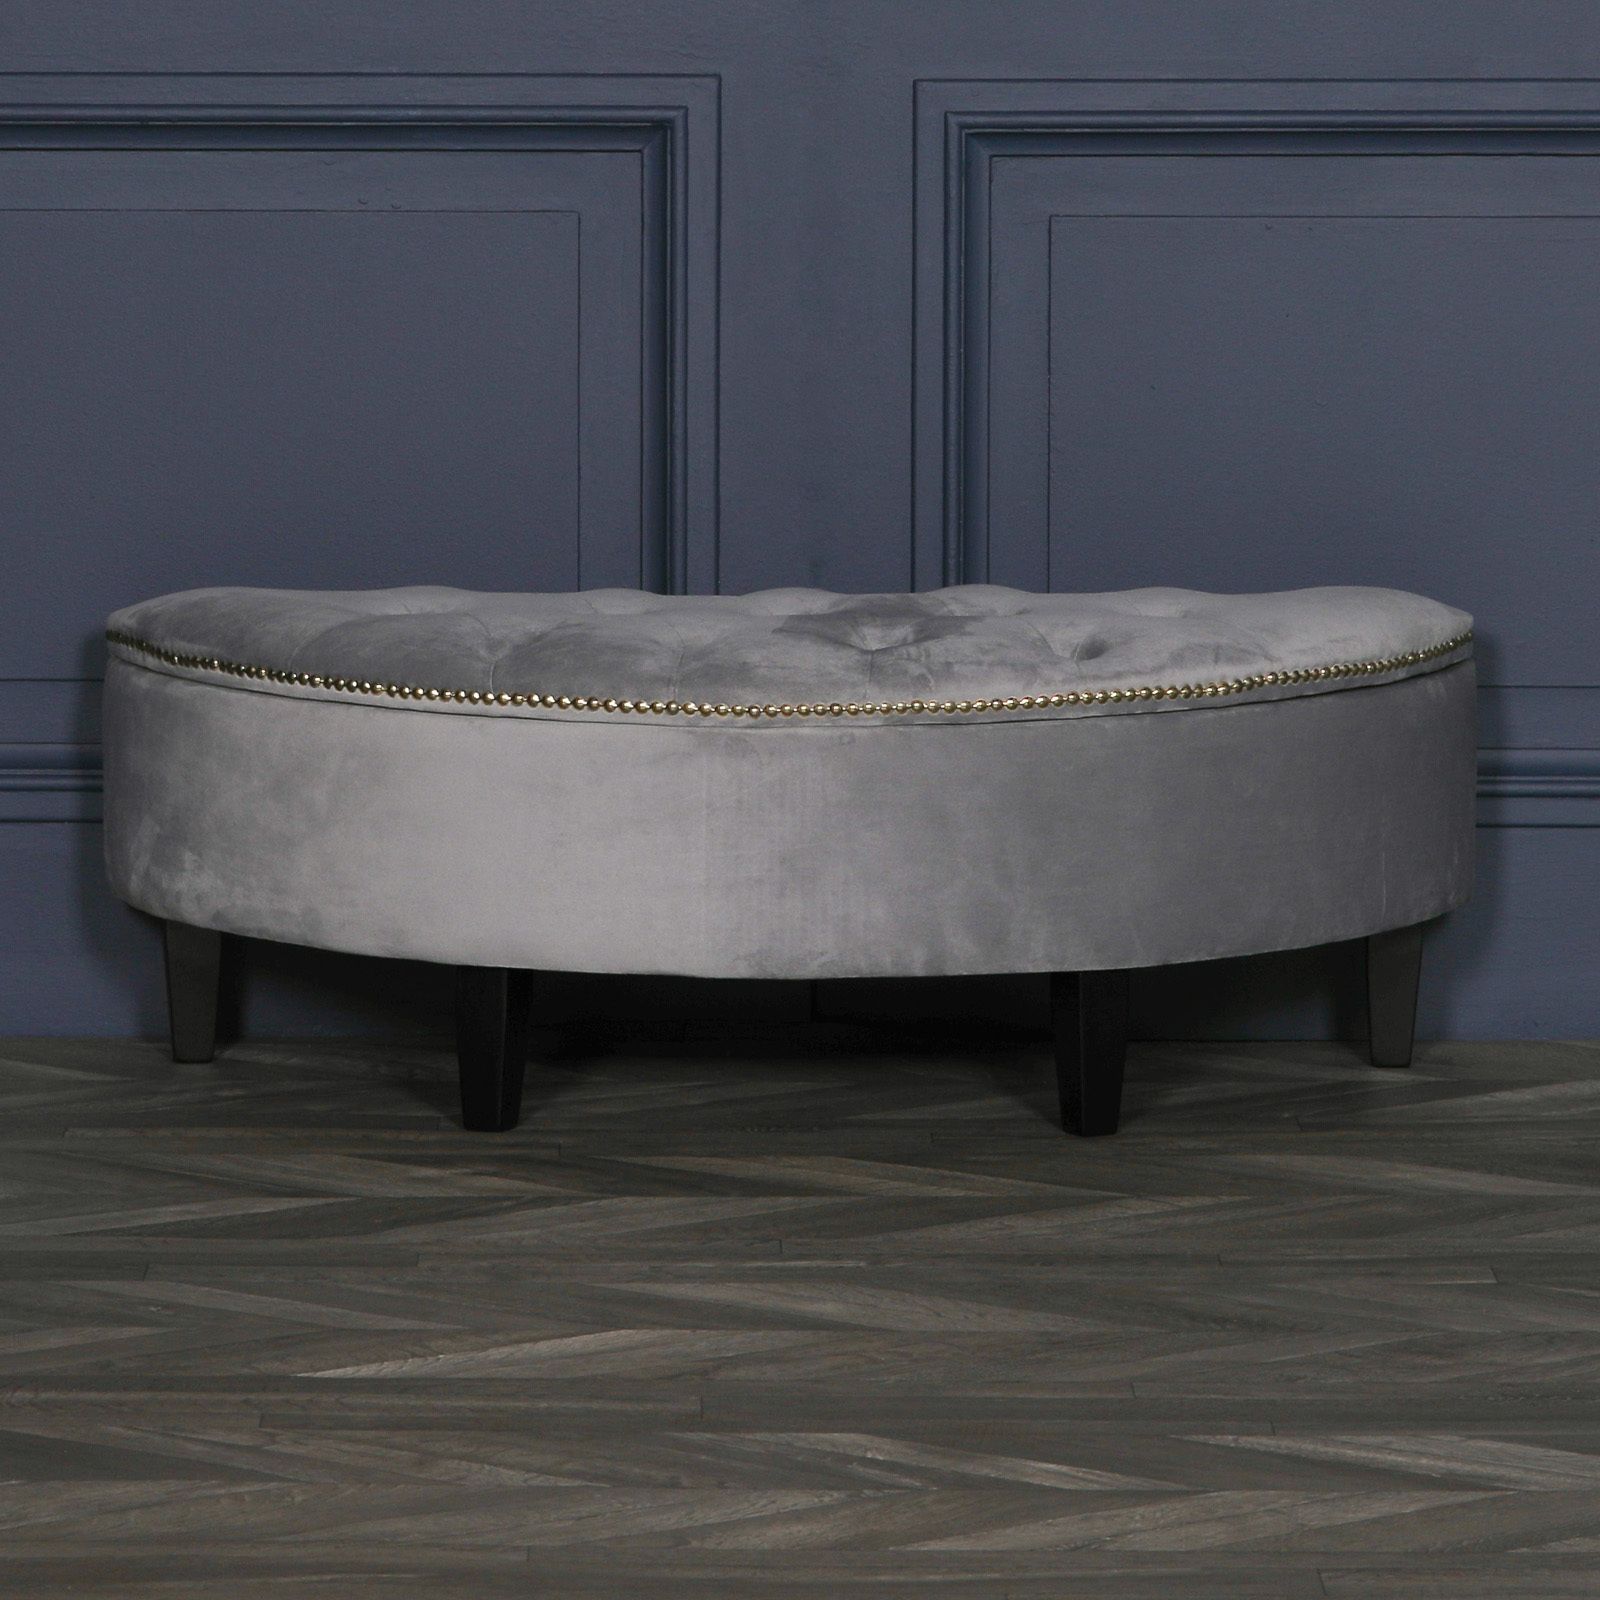 Adelis Contemporary Grey Velvet Buttoned Storage Pouf Ottoman Furniture Throughout Newest Gray Wool Pouf Ottomans (View 10 of 10)